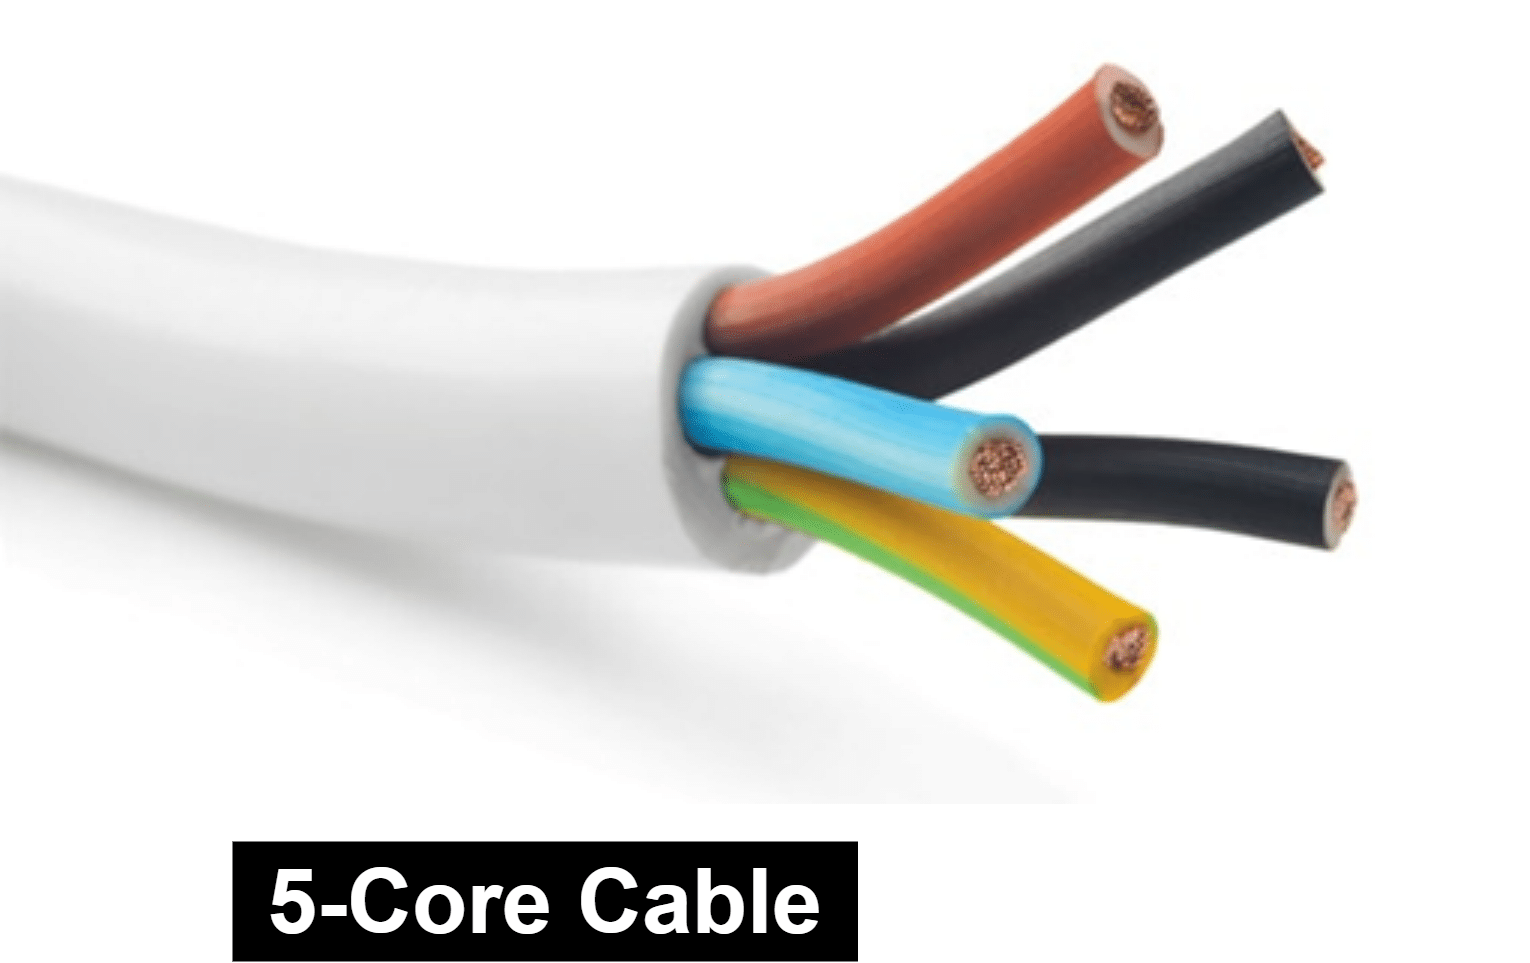 5-core cable